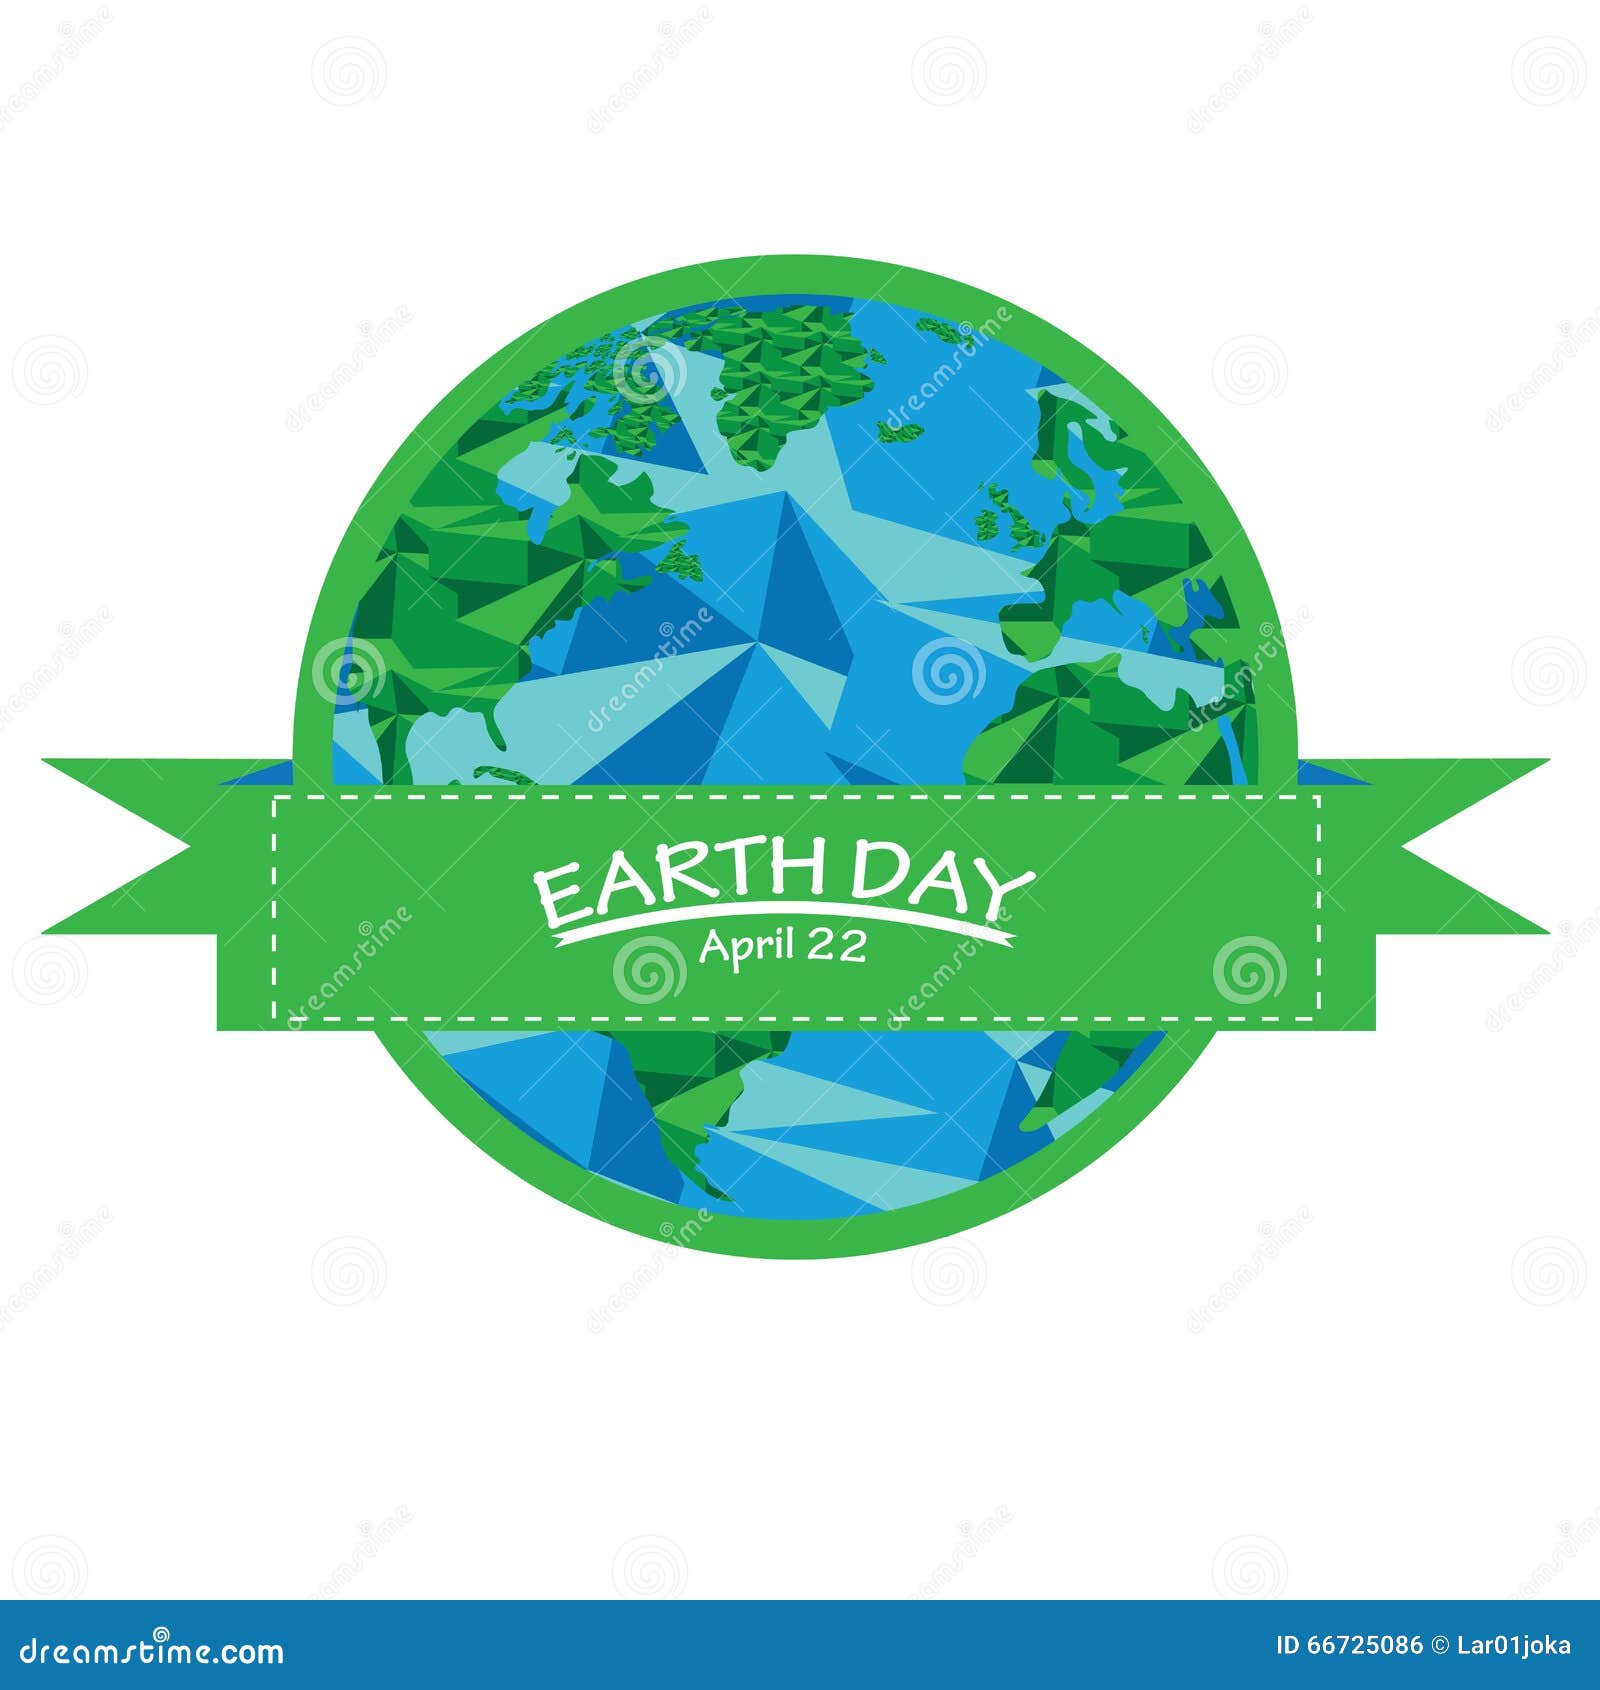 Earth day stock illustration. Illustration of color, environment - 66725086